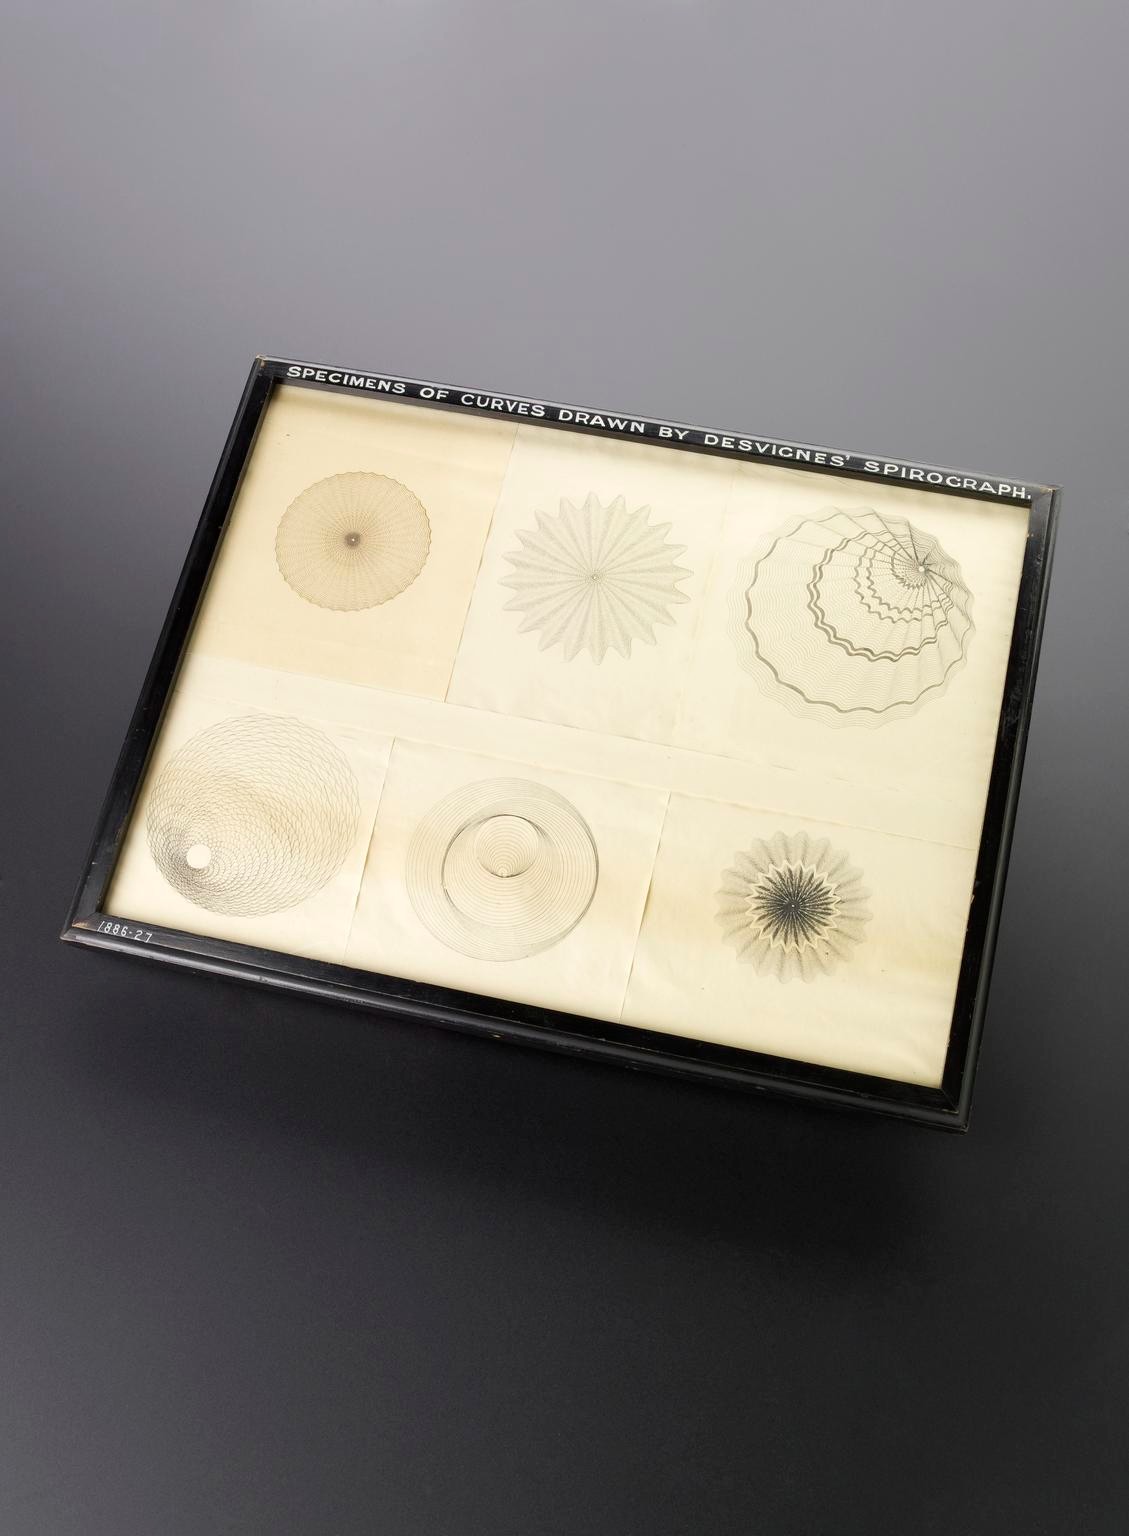 Spirograph and examples of patterns drawn using it MADE: 1886 in Vienna MAKER: Peter Hubert Desvignes 